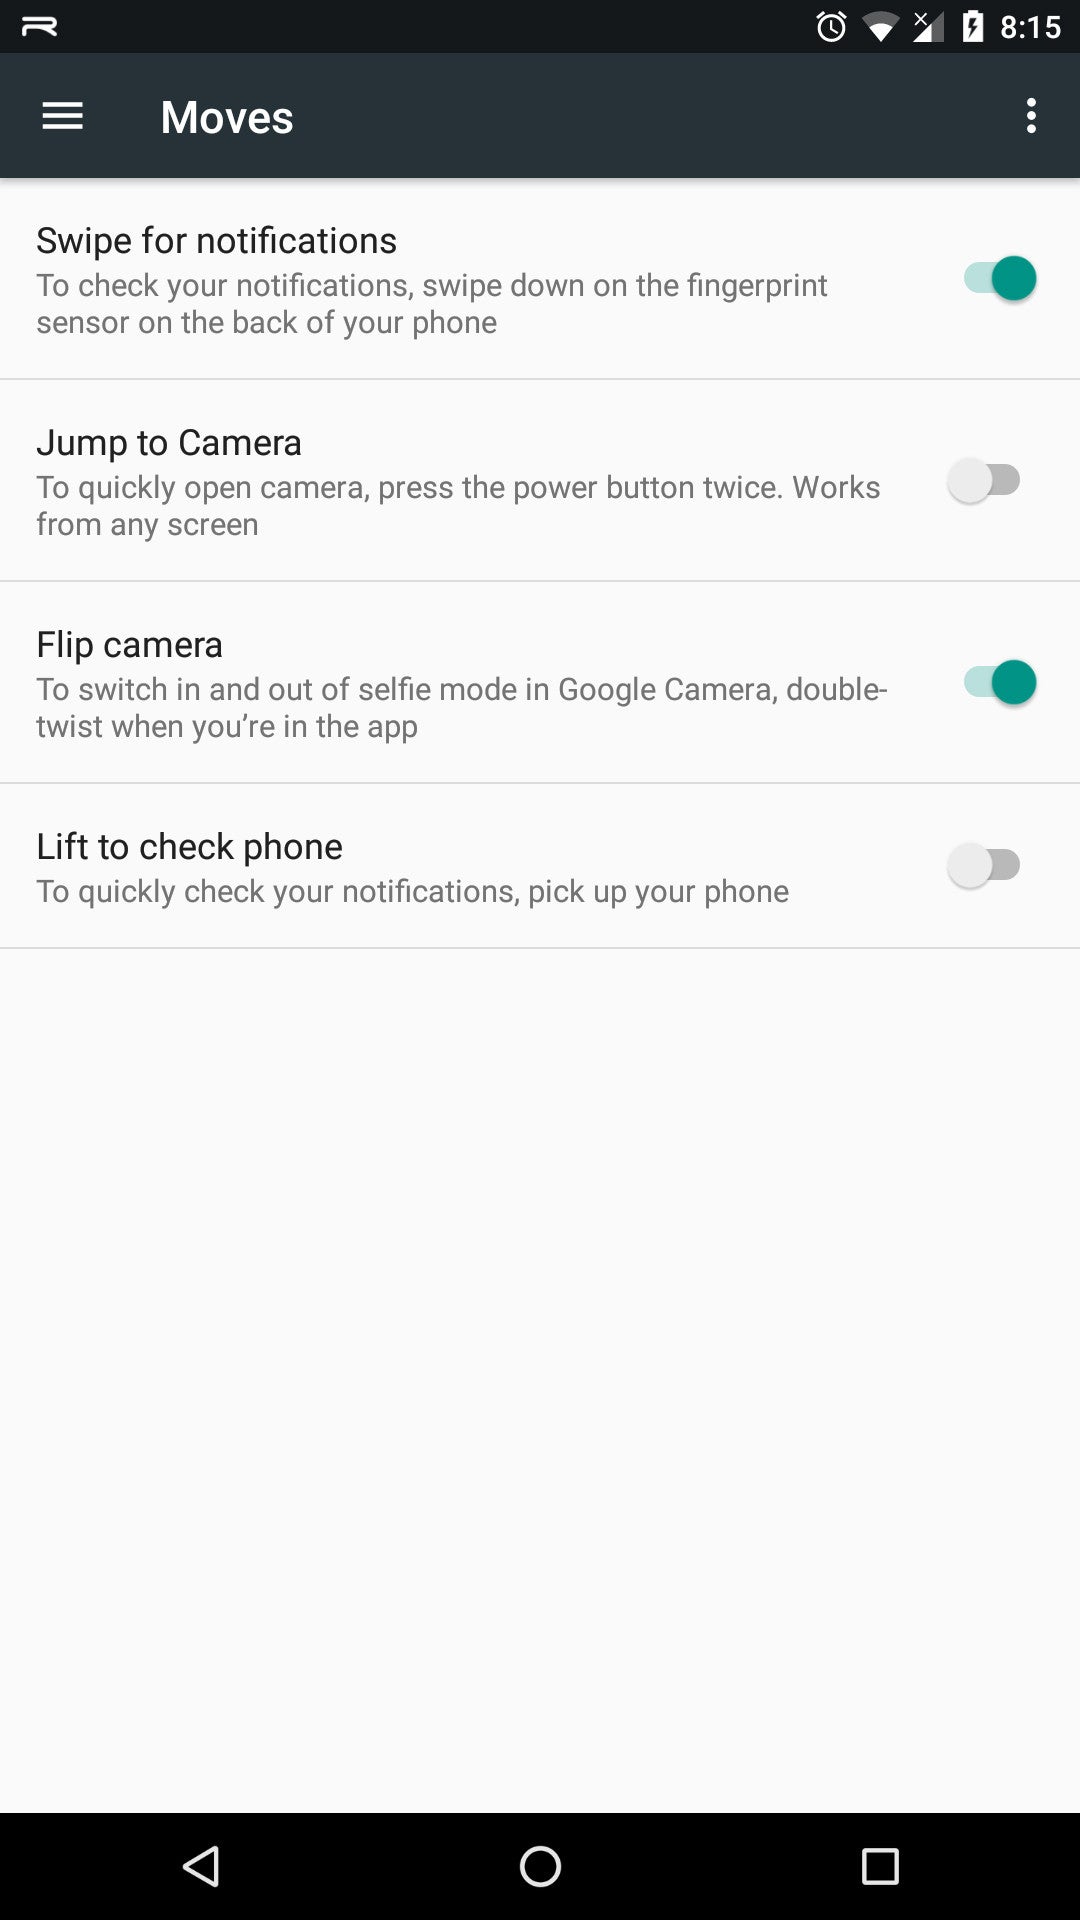 Image courtesy of Reddit user spannerphantom - Android 7.1.2 brings fingerprint gestures over to the Nexus 5X, Nexus 6P likely to follow